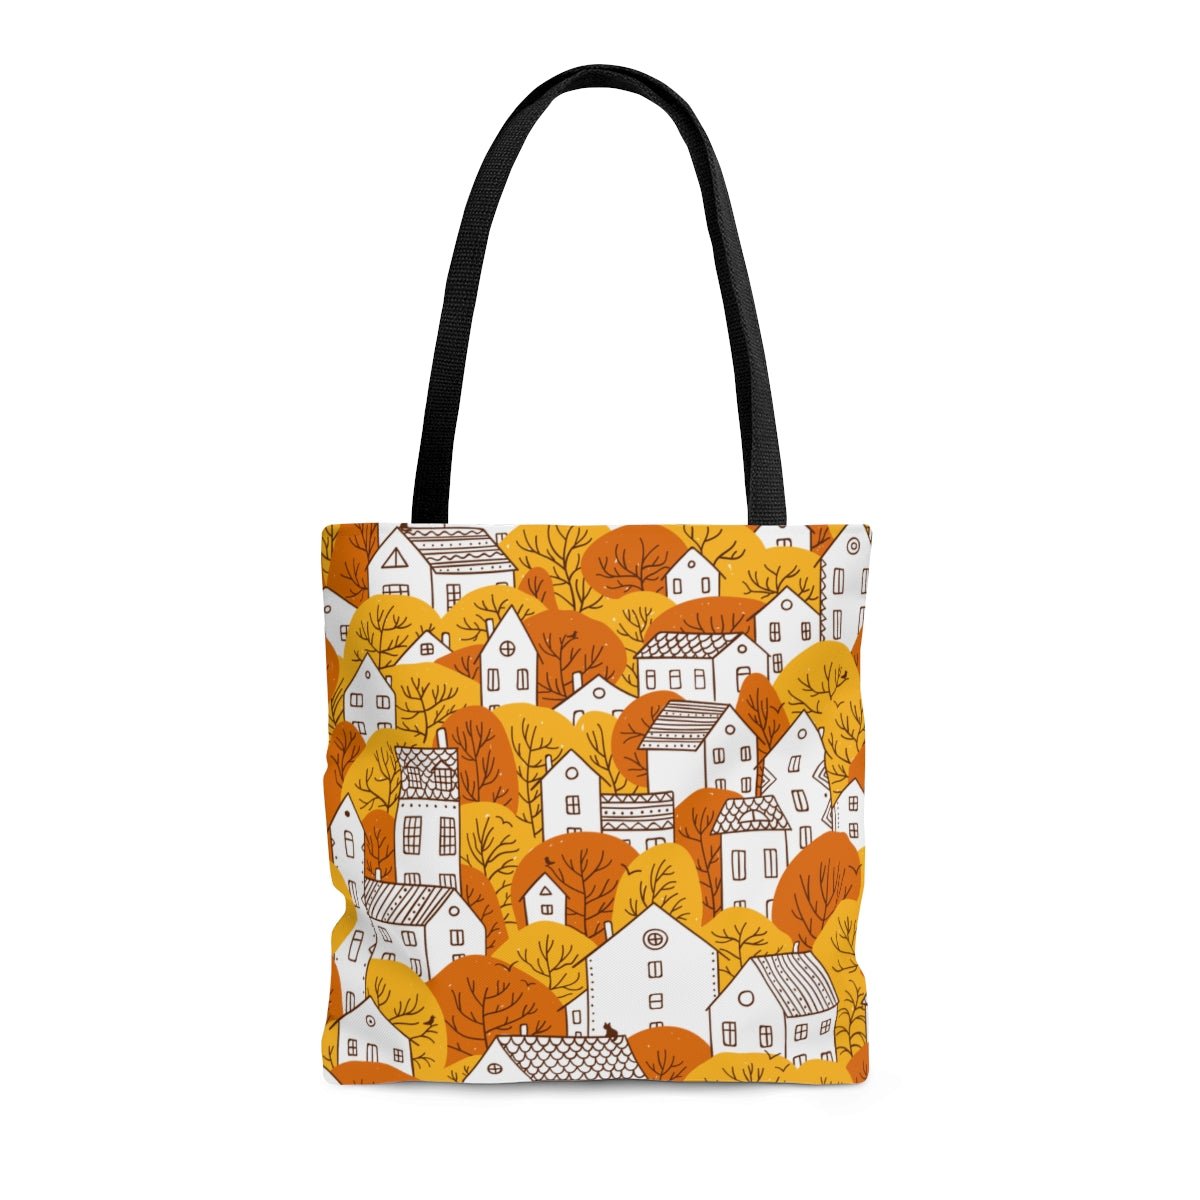 Fall Nordic Houses Tote Bag - Puffin Lime